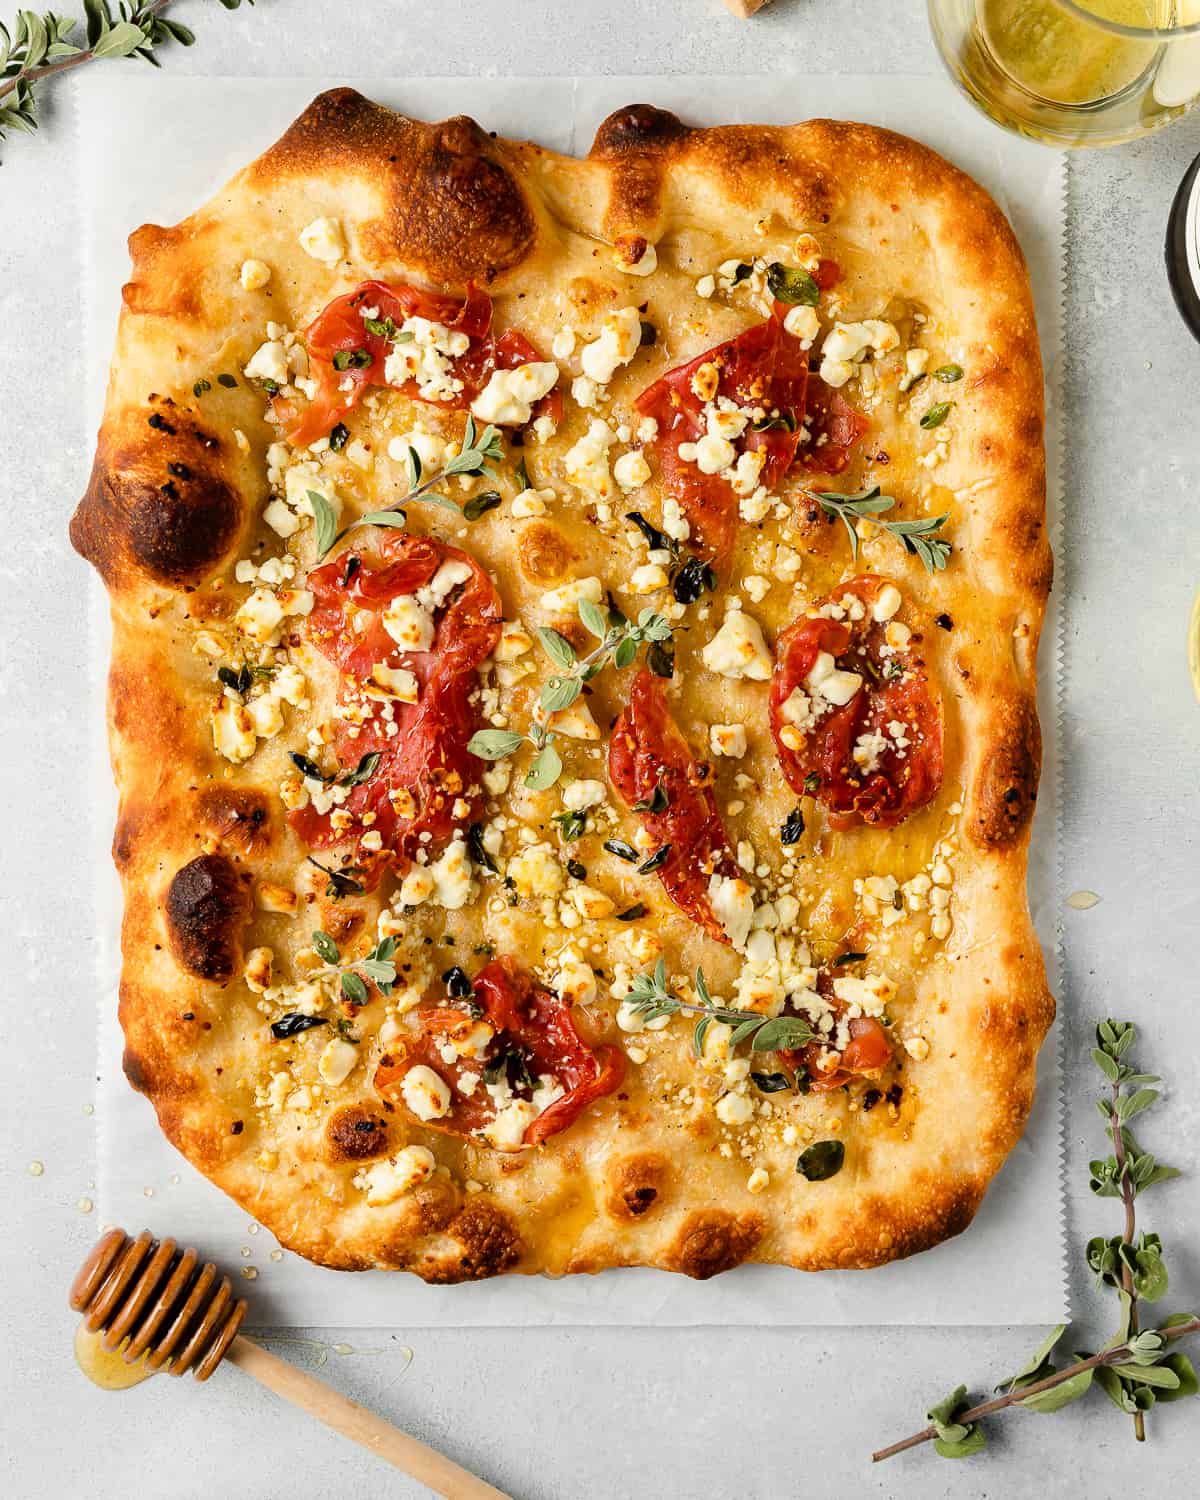 baked Pizza With Marjoram & Prosciutto.